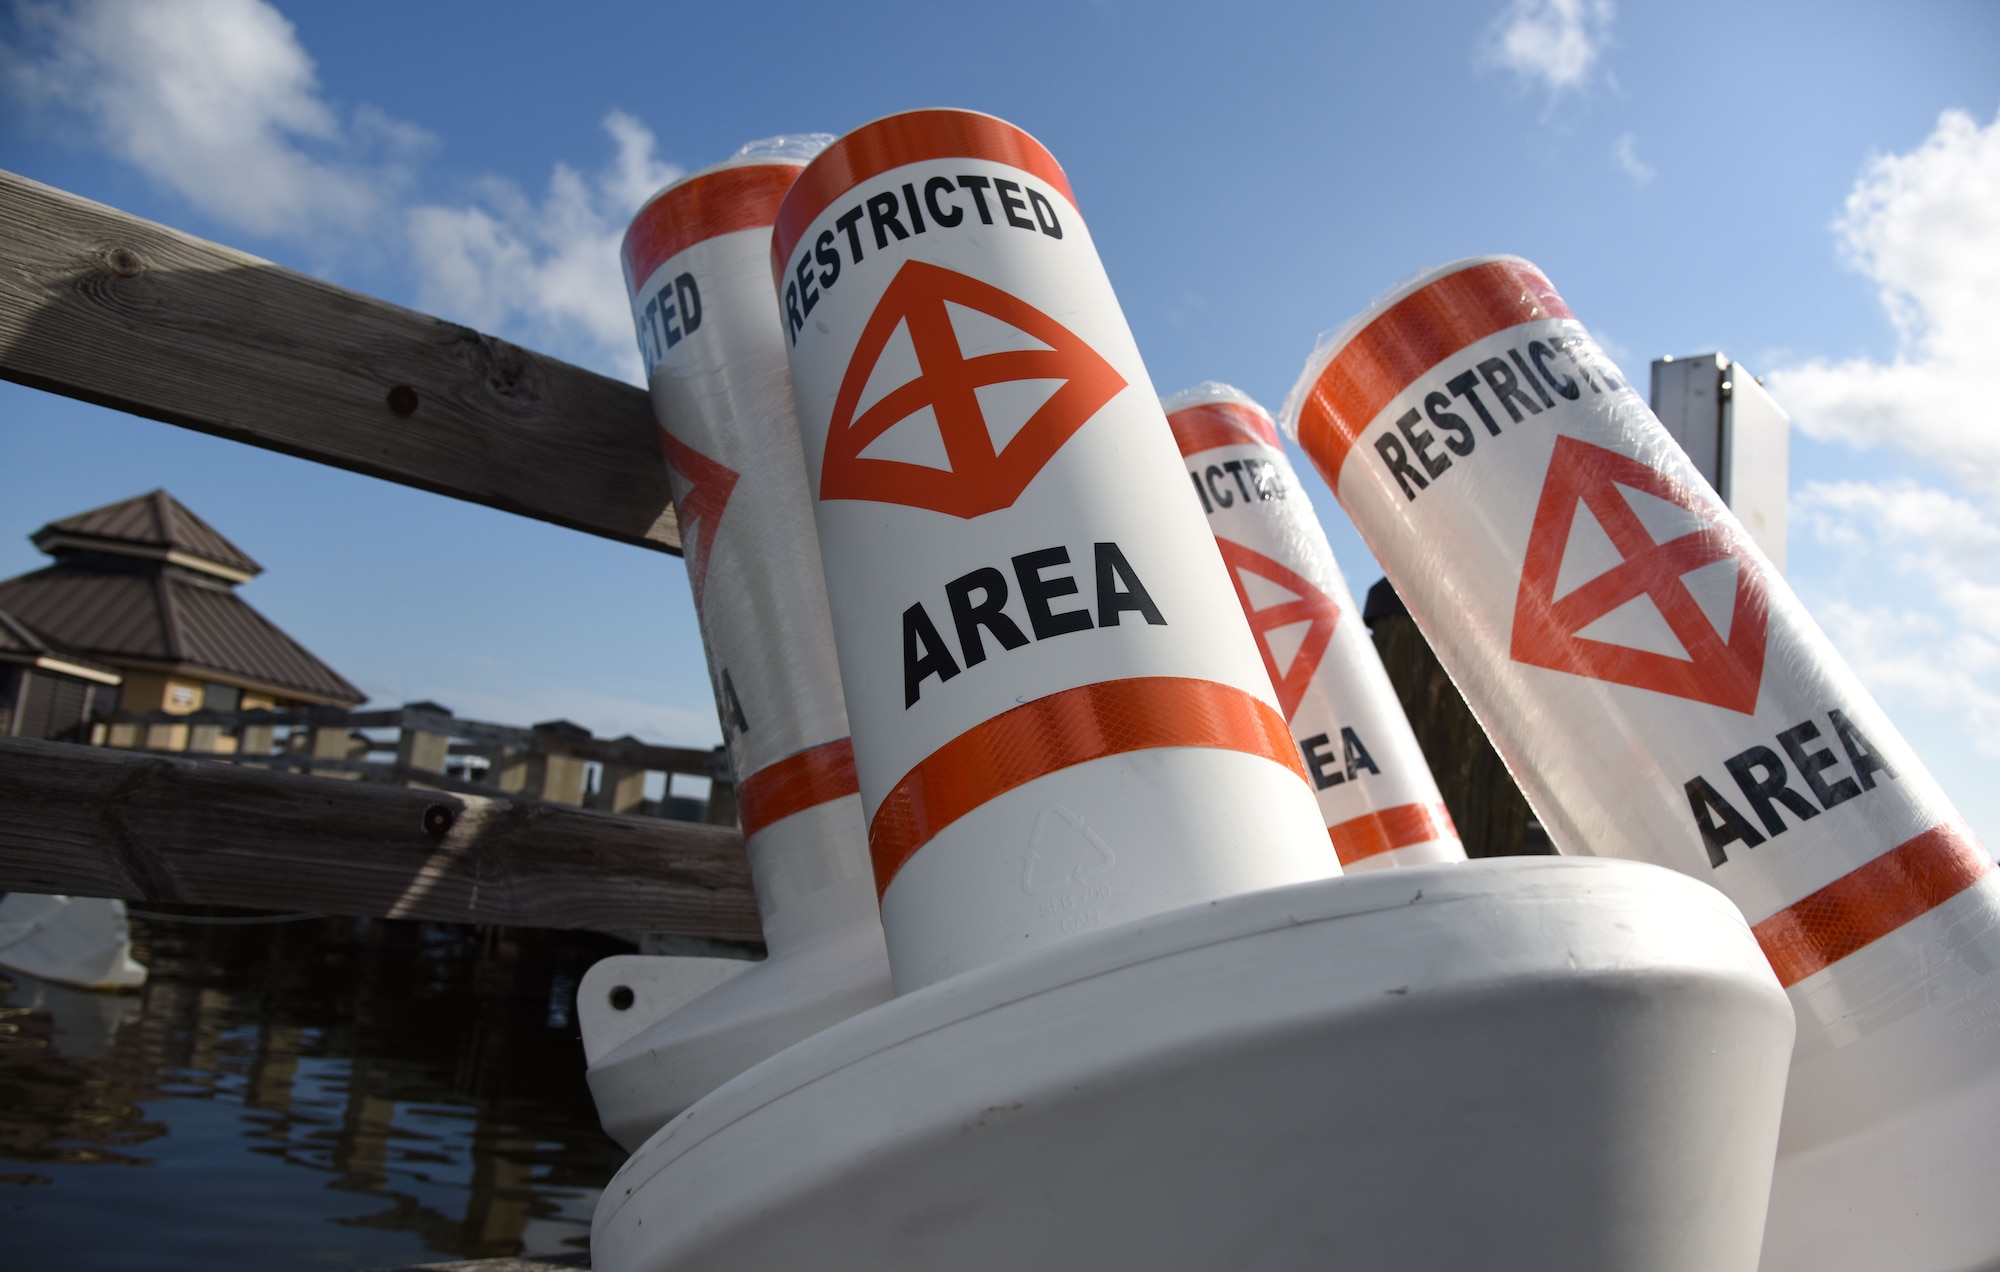 Restricted area buoys are placed on a pier at The Marina at Keesler Air Force Base, Mississippi, May 23, 2018. Keesler and the Department of Marine Resources partnered to install 15 buoys in the Biloxi Back Bay 150 feet from the Keesler shore line as an added base security measure. This project took almost two years of research and coordination with the 81st Security Forces Squadron Anti-terrorism Office, 81st Training Wing Legal Office, the state of Mississippi as well as the Army Corps of Engineers in Washington, D.C. (U.S. Air Force photo by Kemberly Groue)